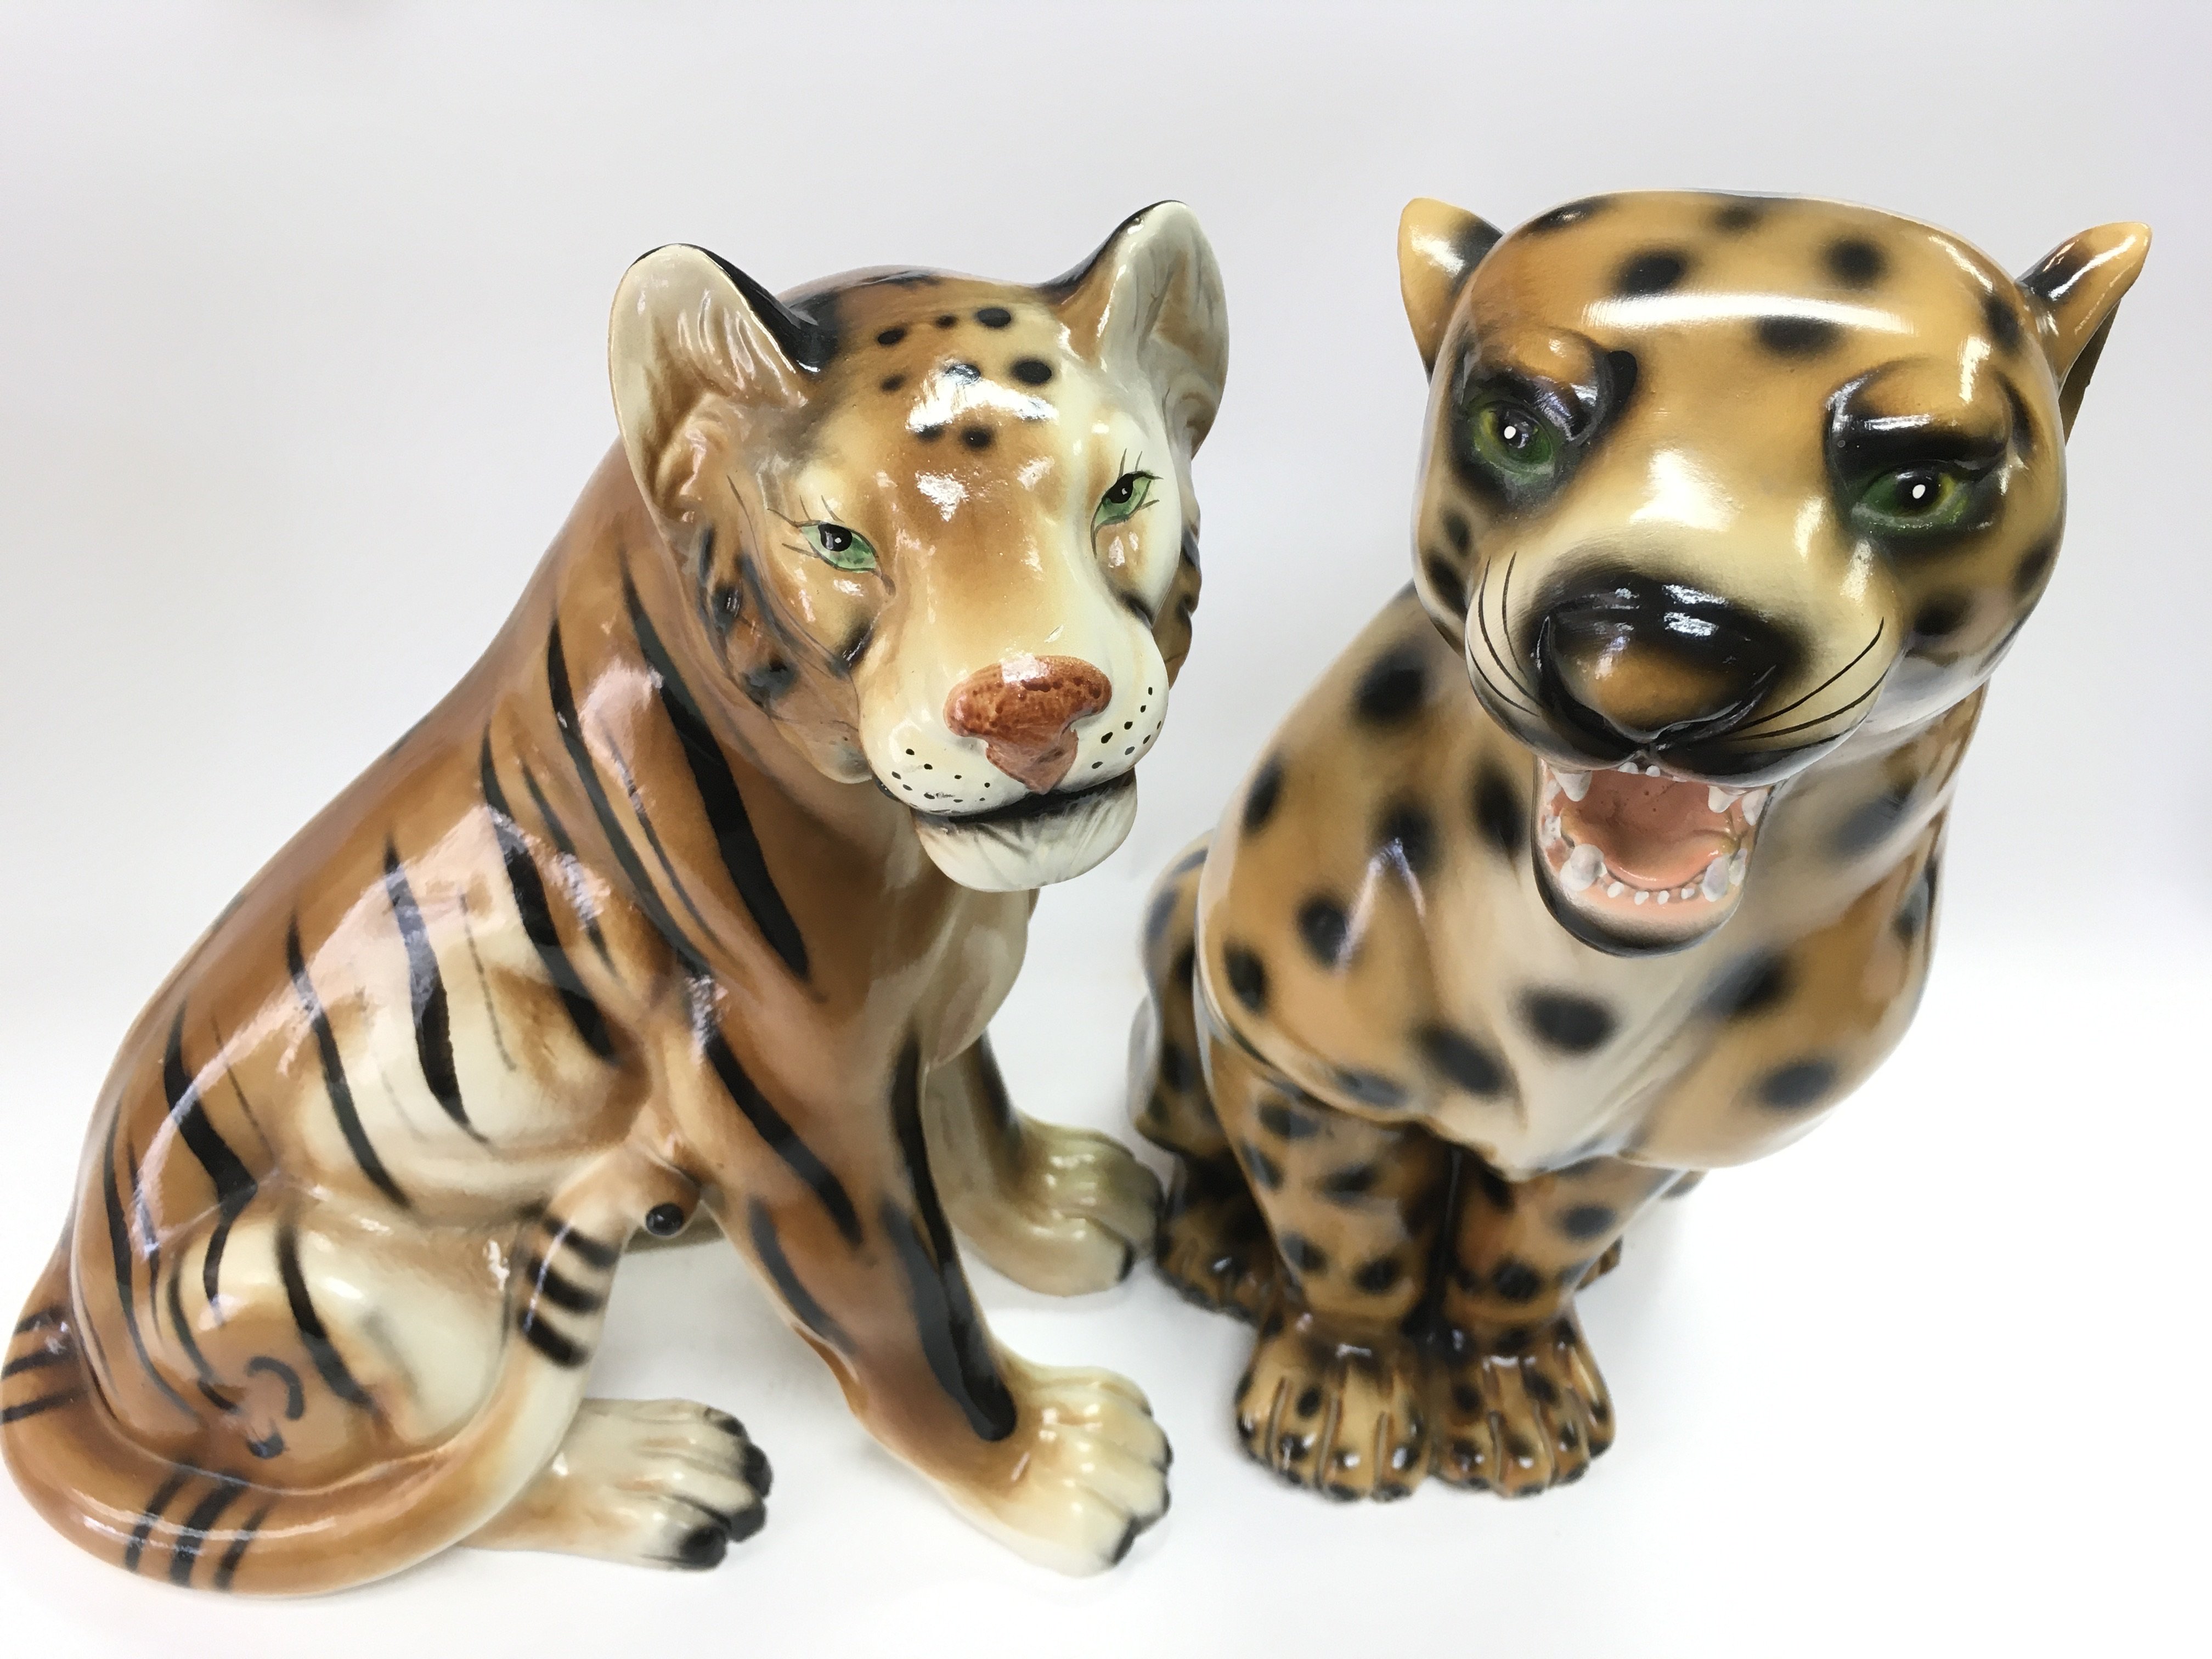 Ceramic figures of a tiger & leopard. Postage Cate